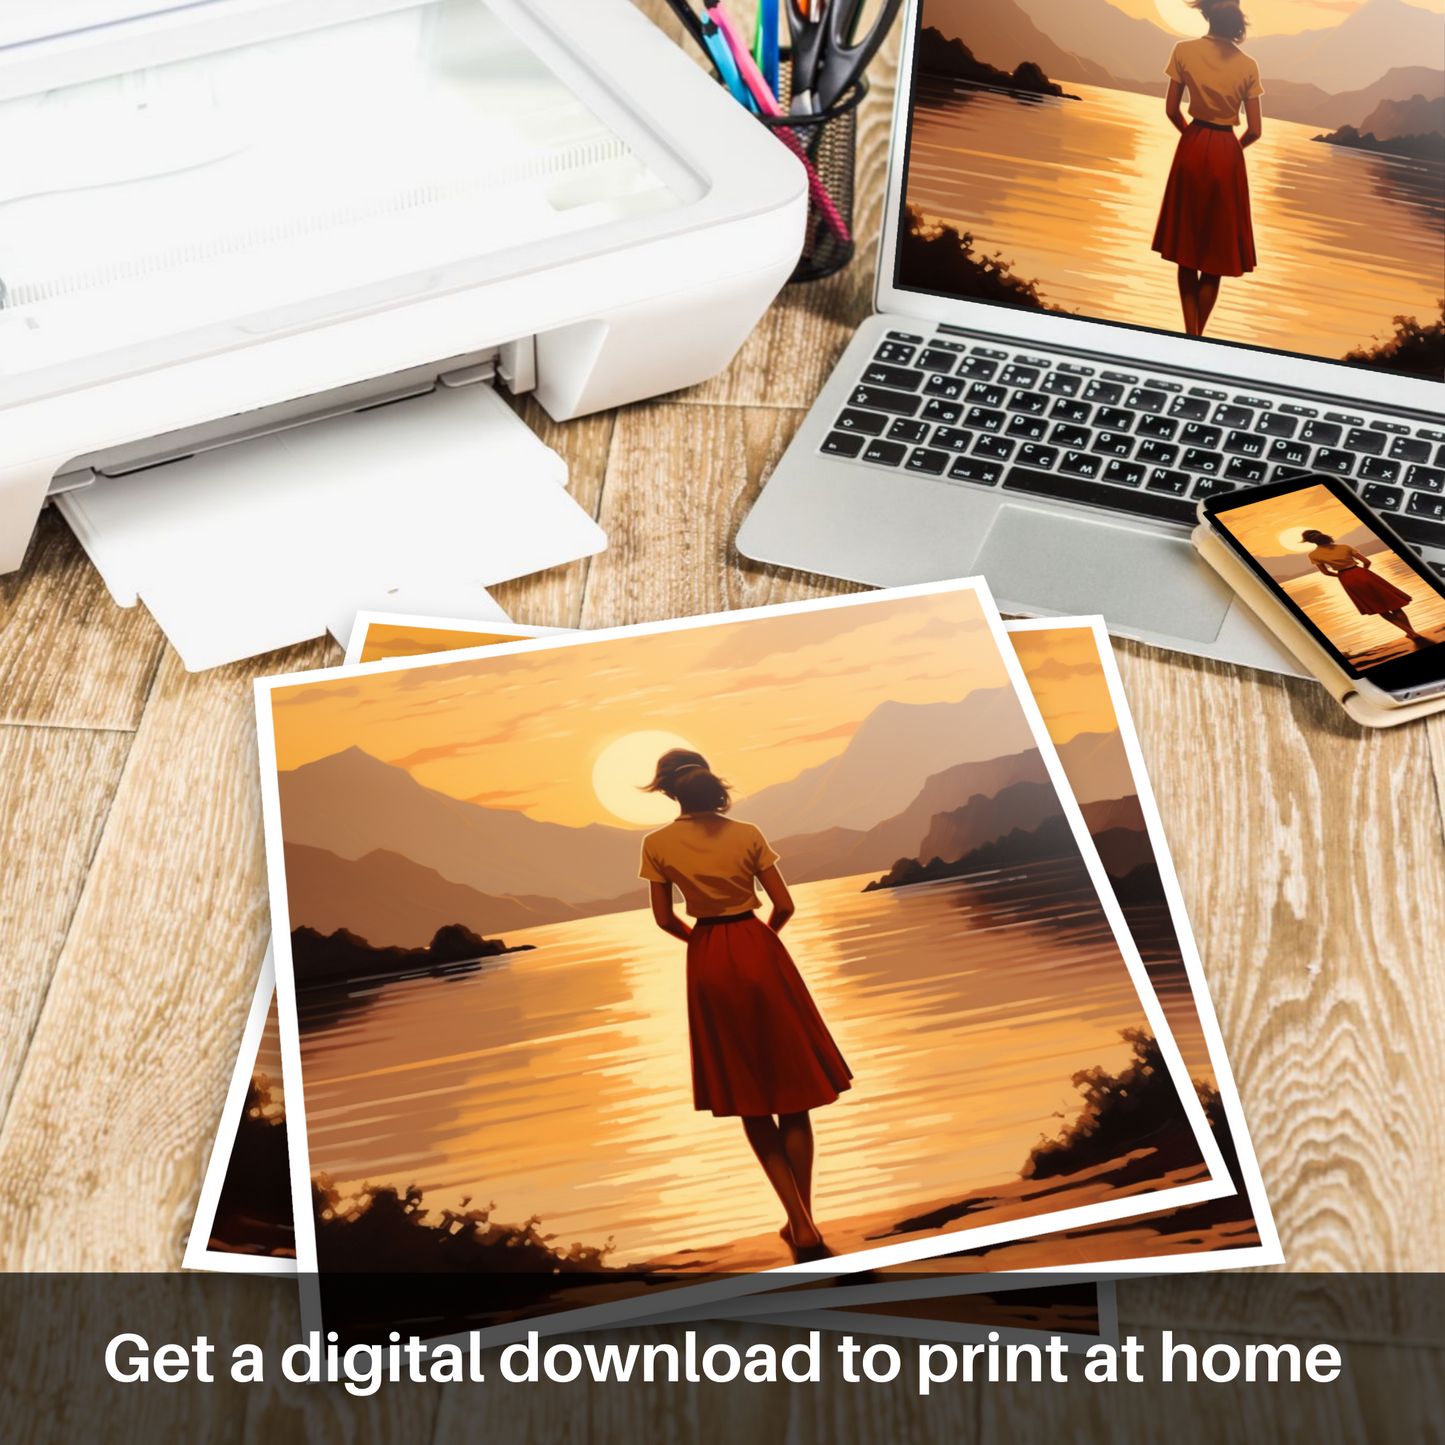 Downloadable and printable picture of Golden hour at Loch Lomond